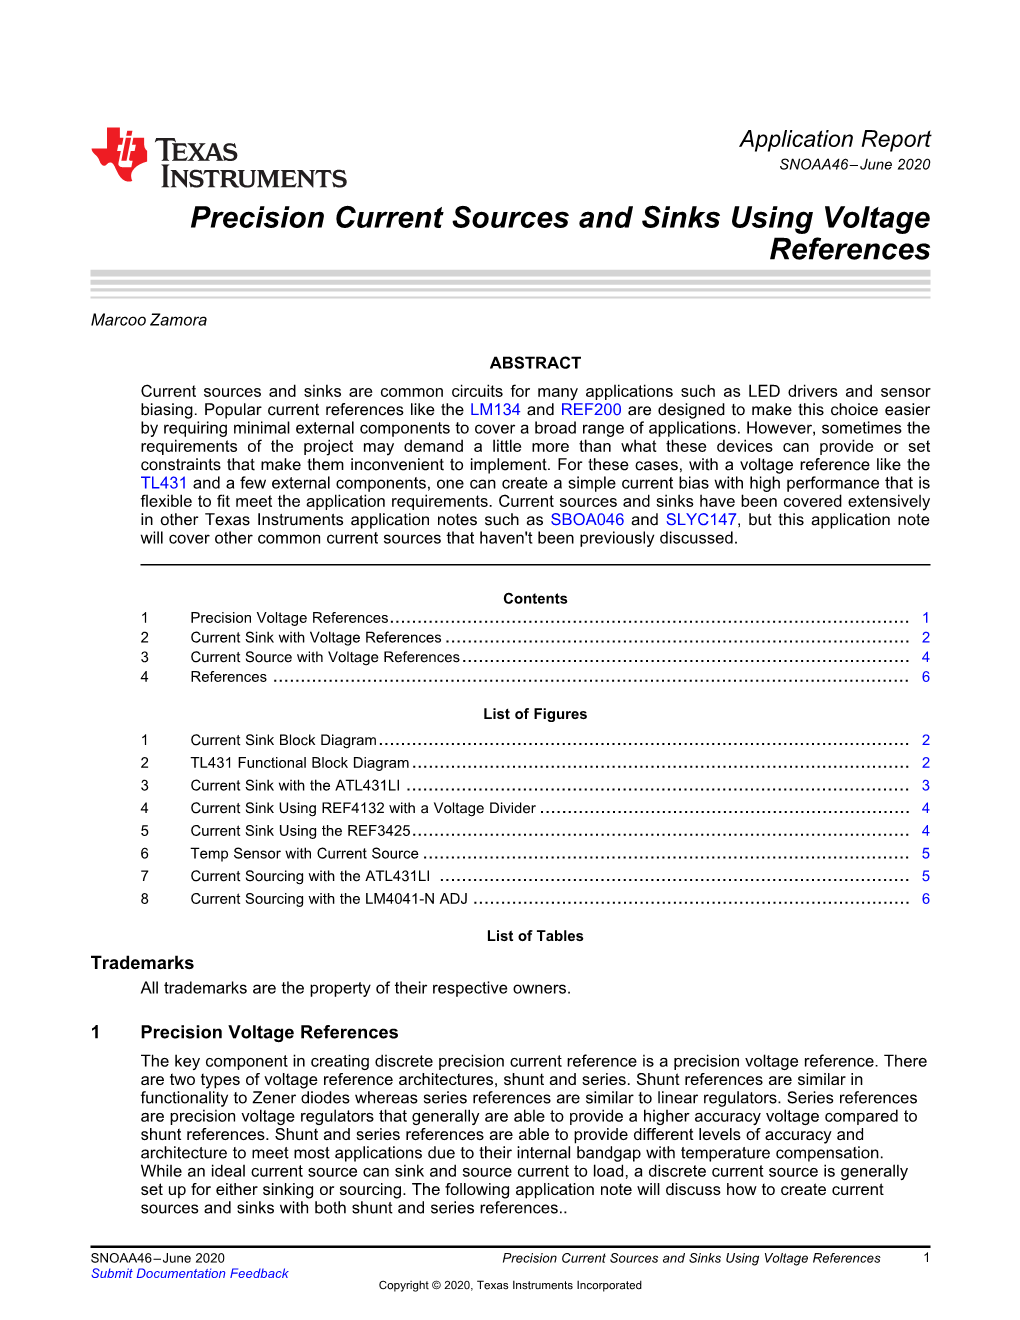 Precision Current Sources and Sinks Using Voltage References